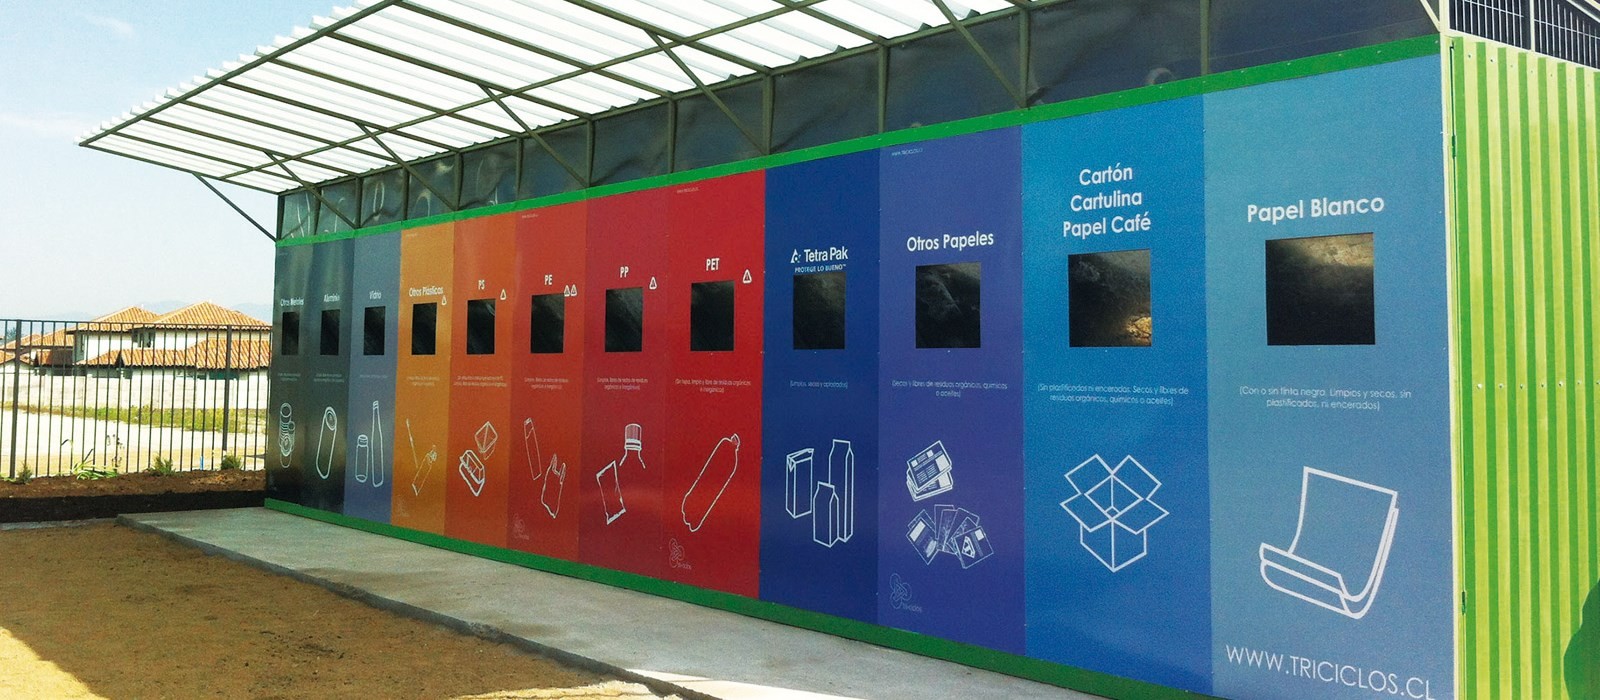 Recycling containers by TriCiclos in Chile